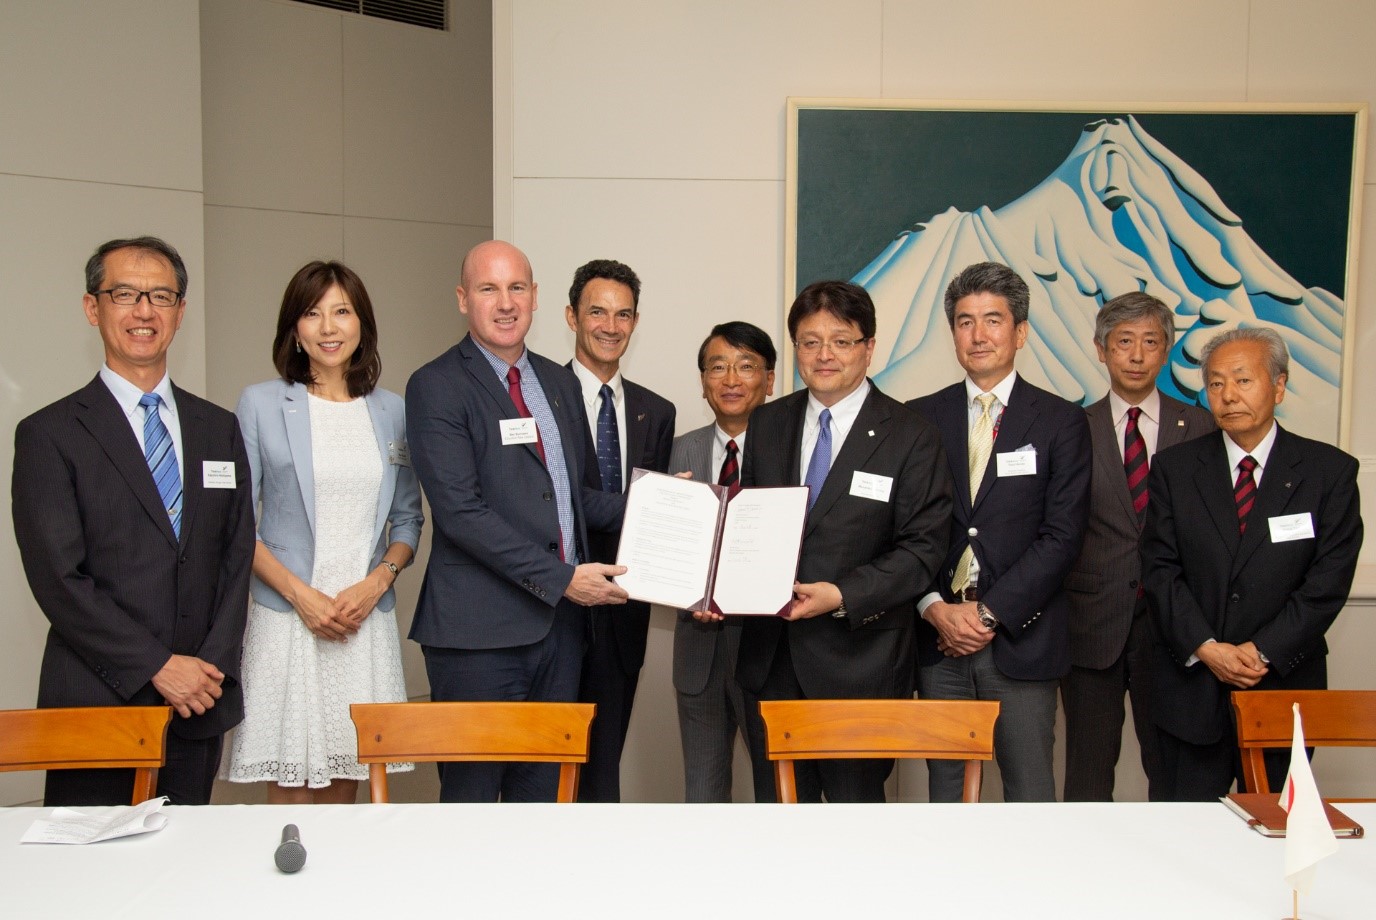 Japan New Zealand education ties strengthen with growing collaboration